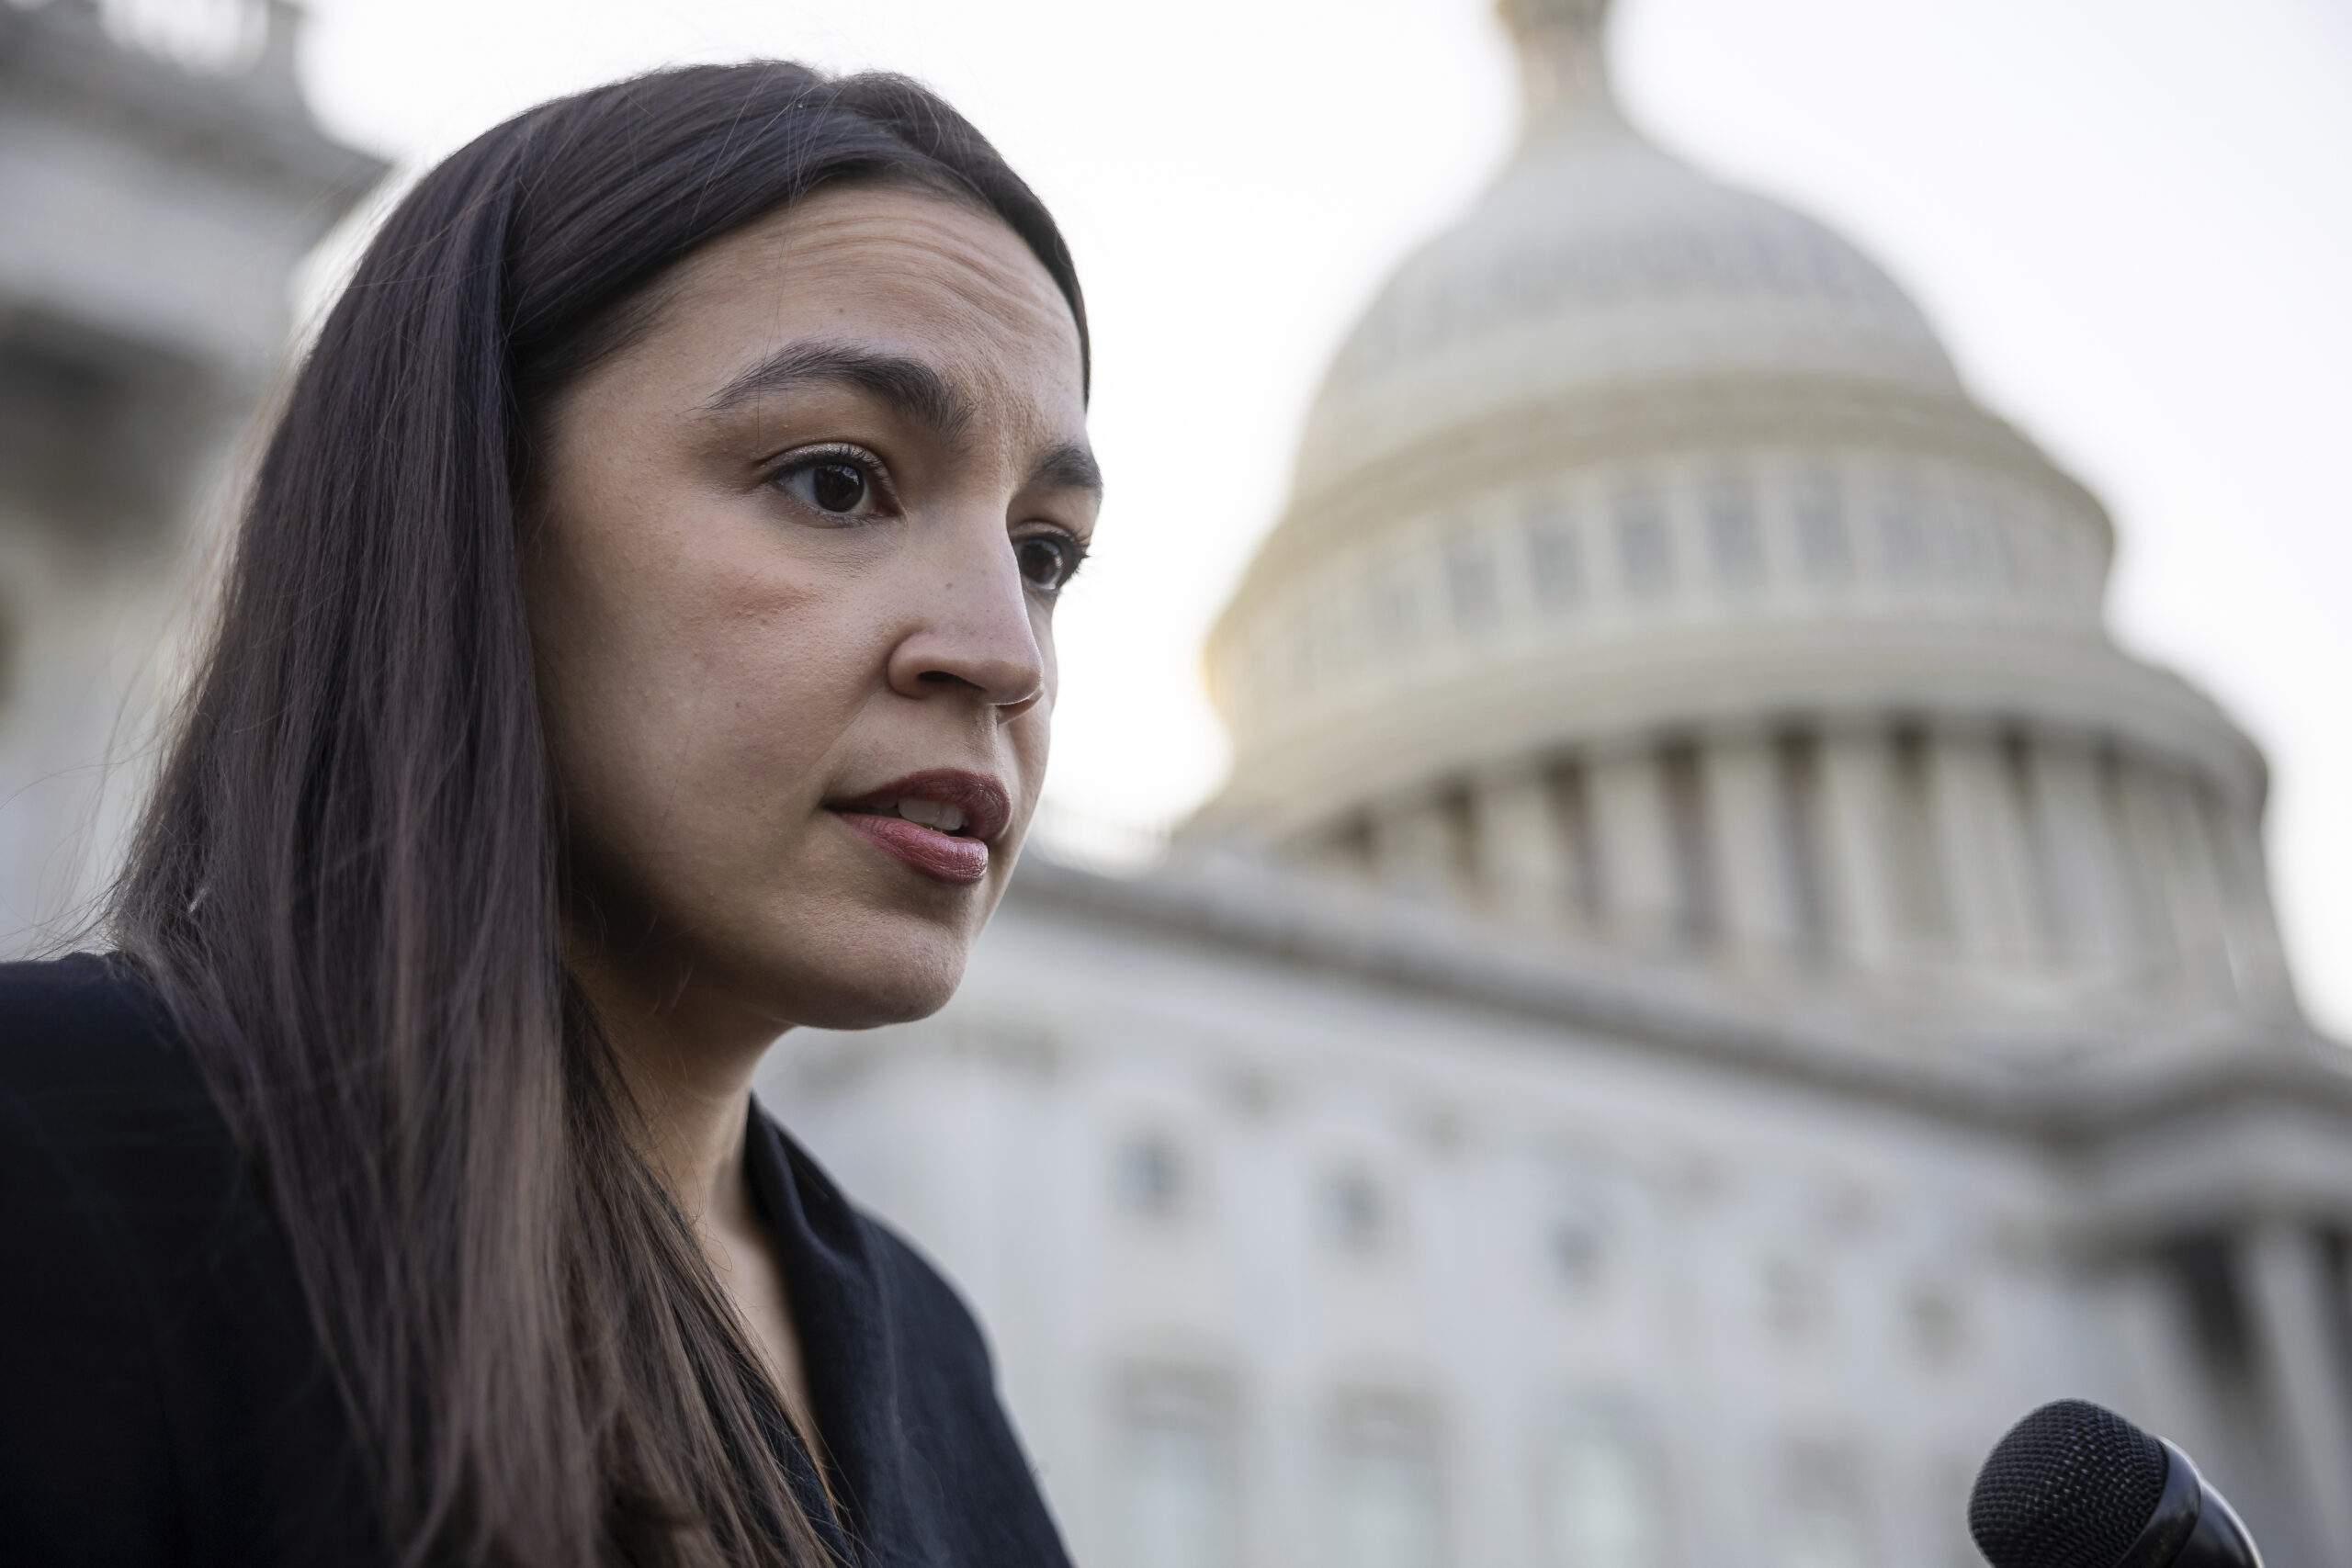 AOC’s view on the debt limit: Democrats still have the upper hand